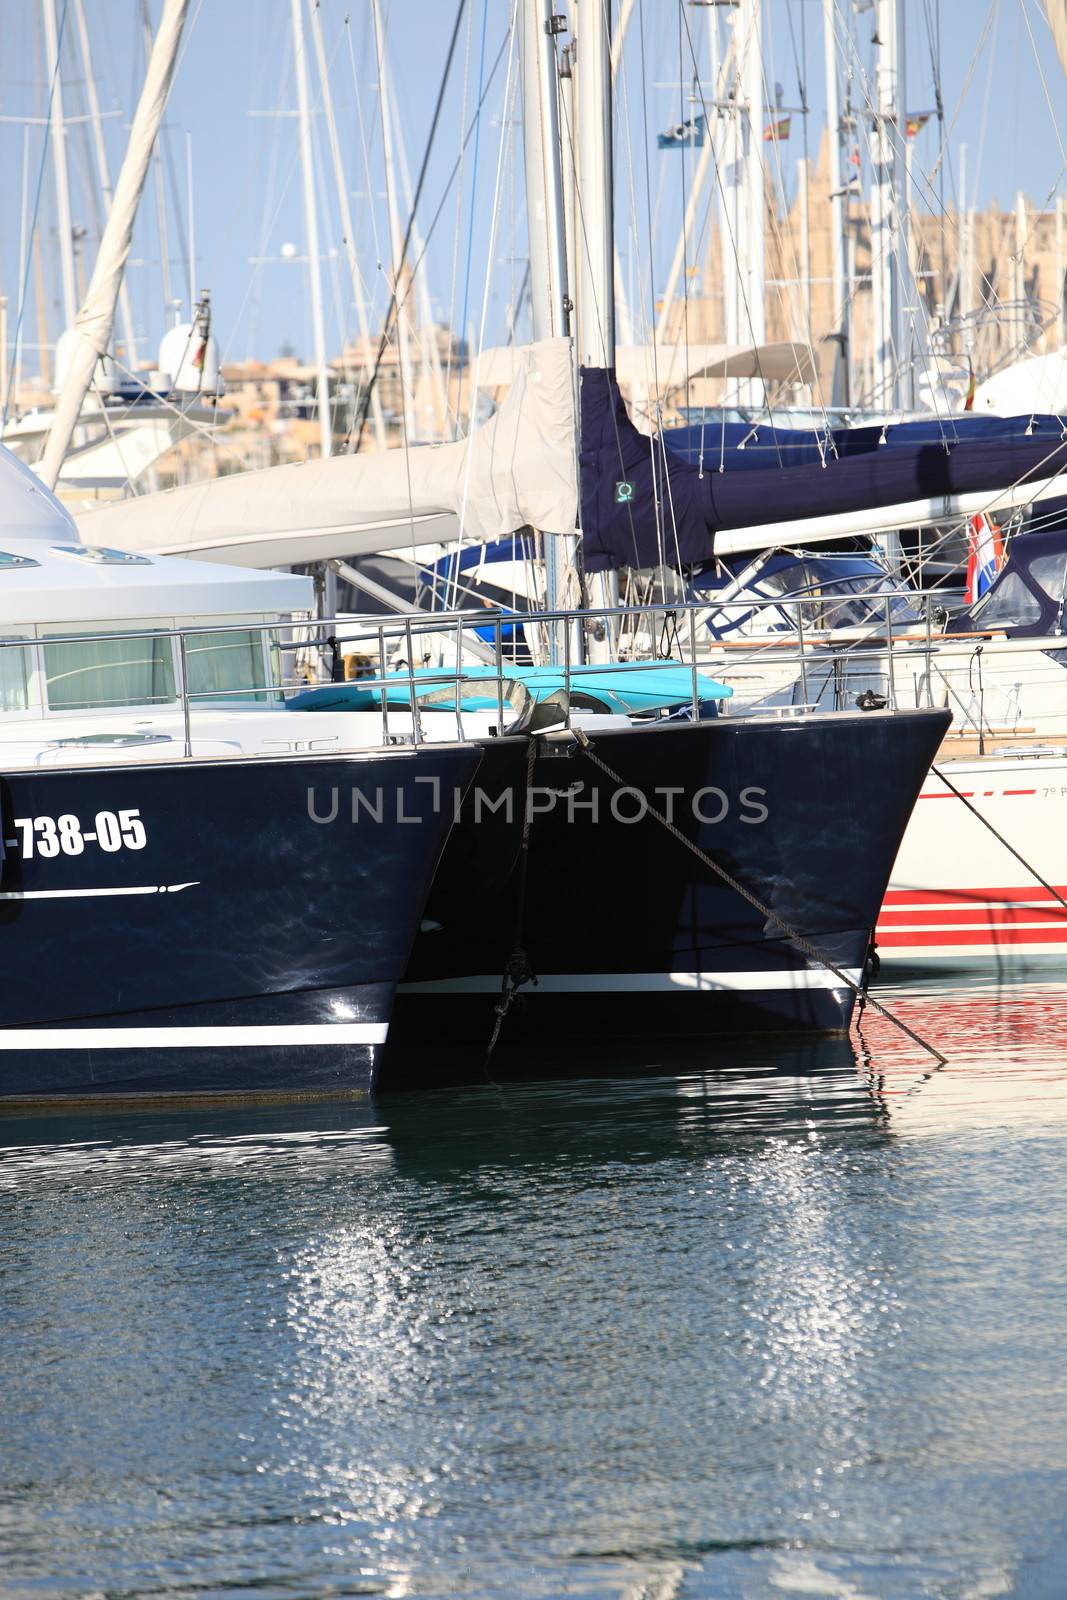 Luxury catamaran with a black hull moored in a marine harbour amongst luxury pleasure boats